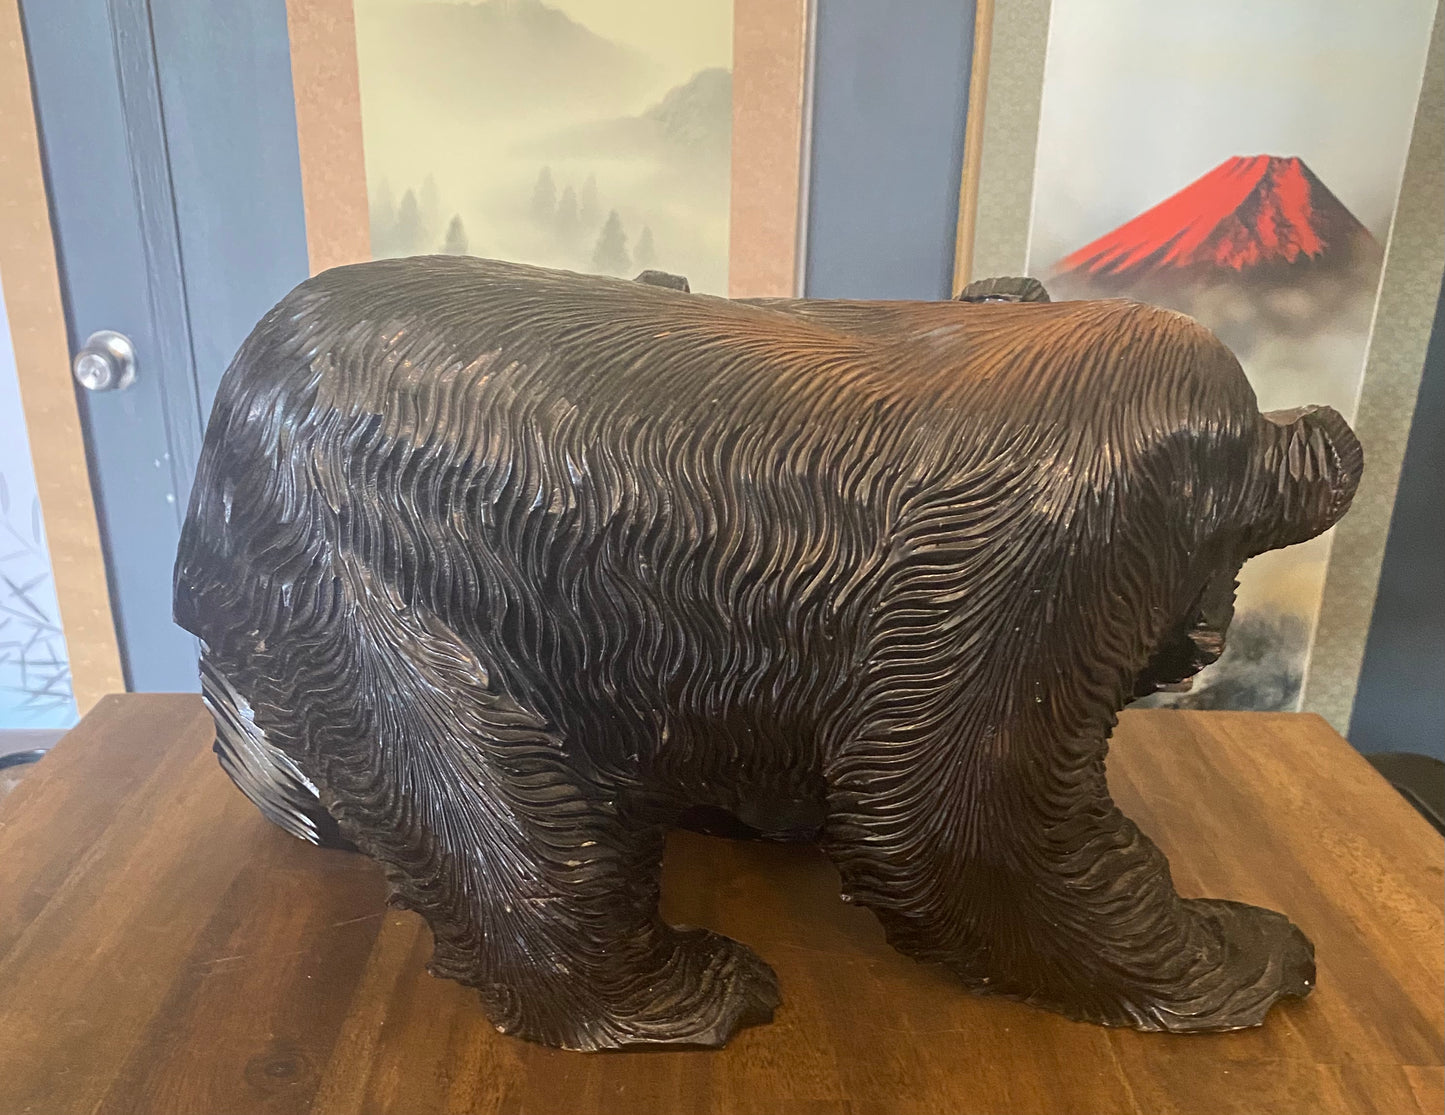 Japanese Carved Wooden Bear